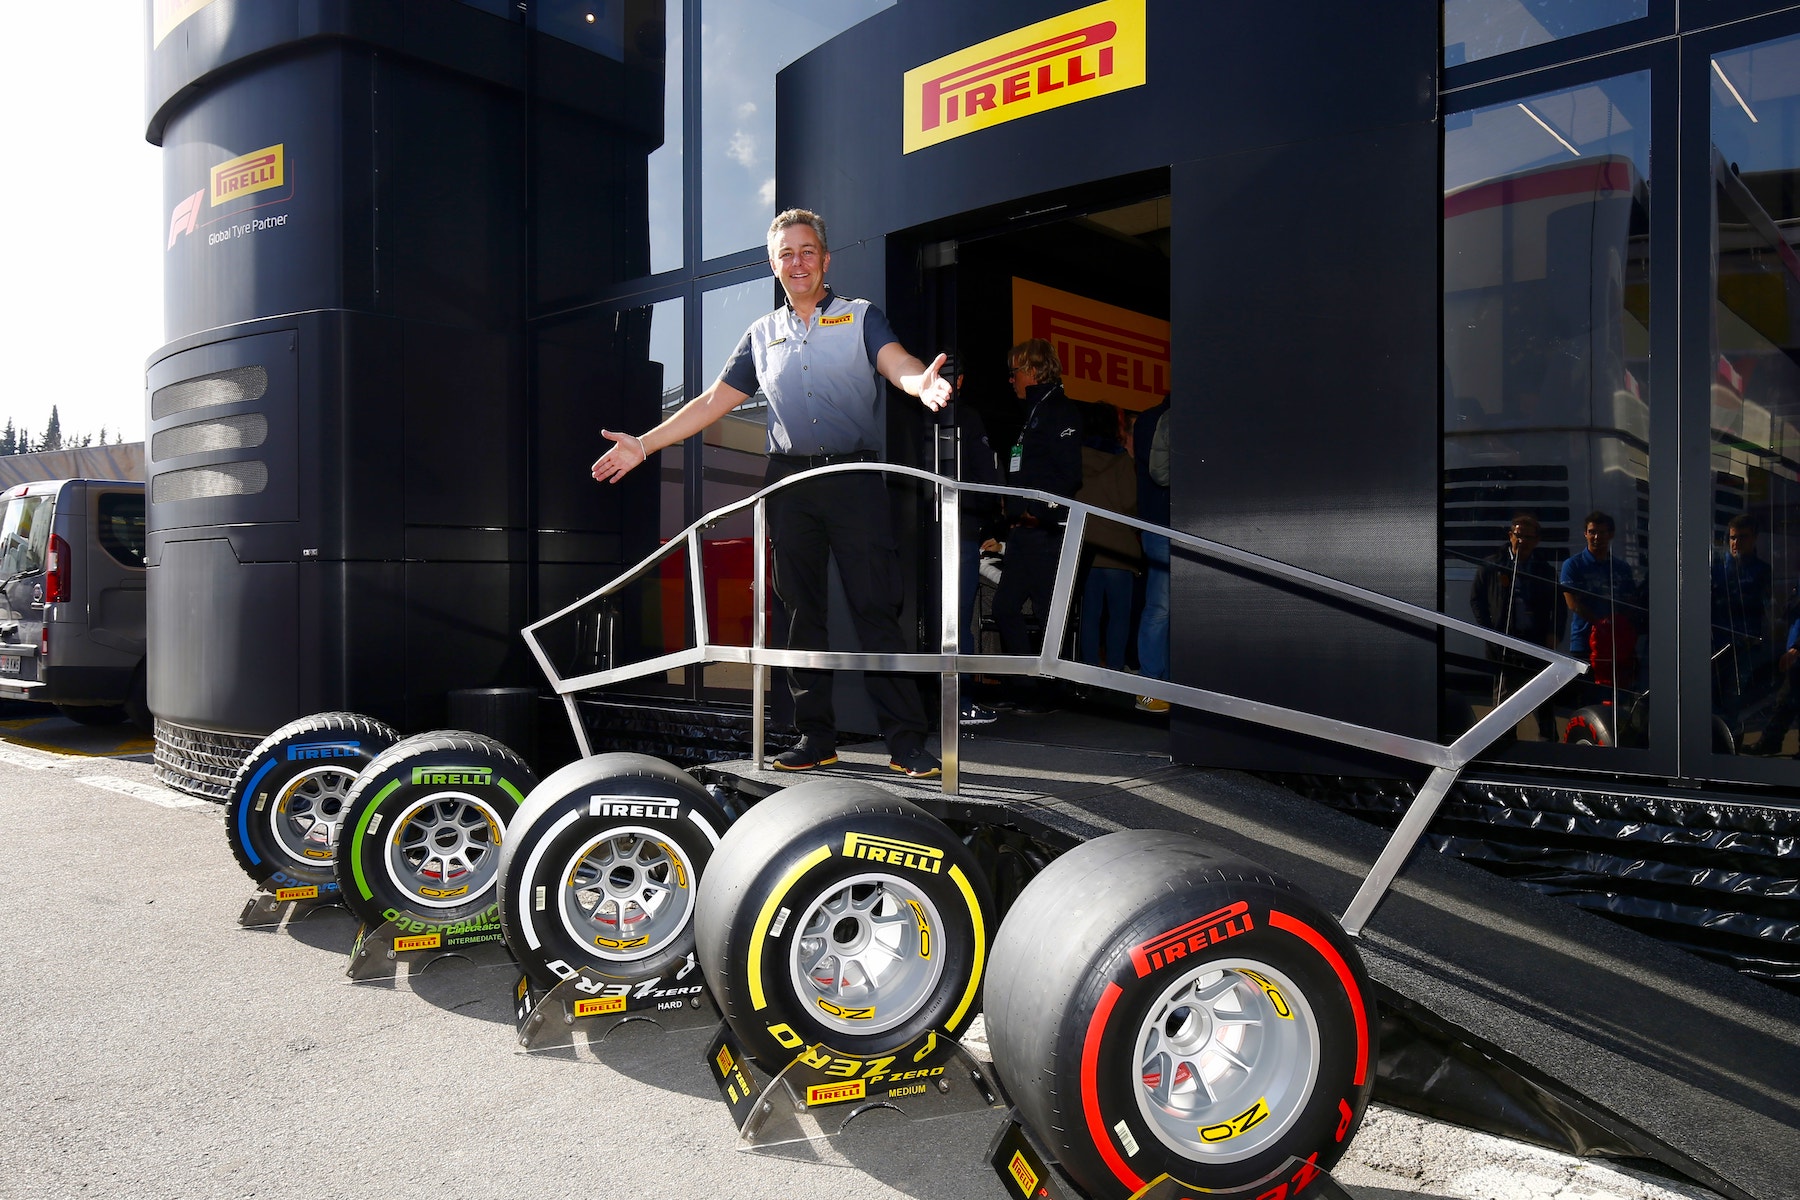 Whats new with Pirellis 2019 Formula 1 tires?